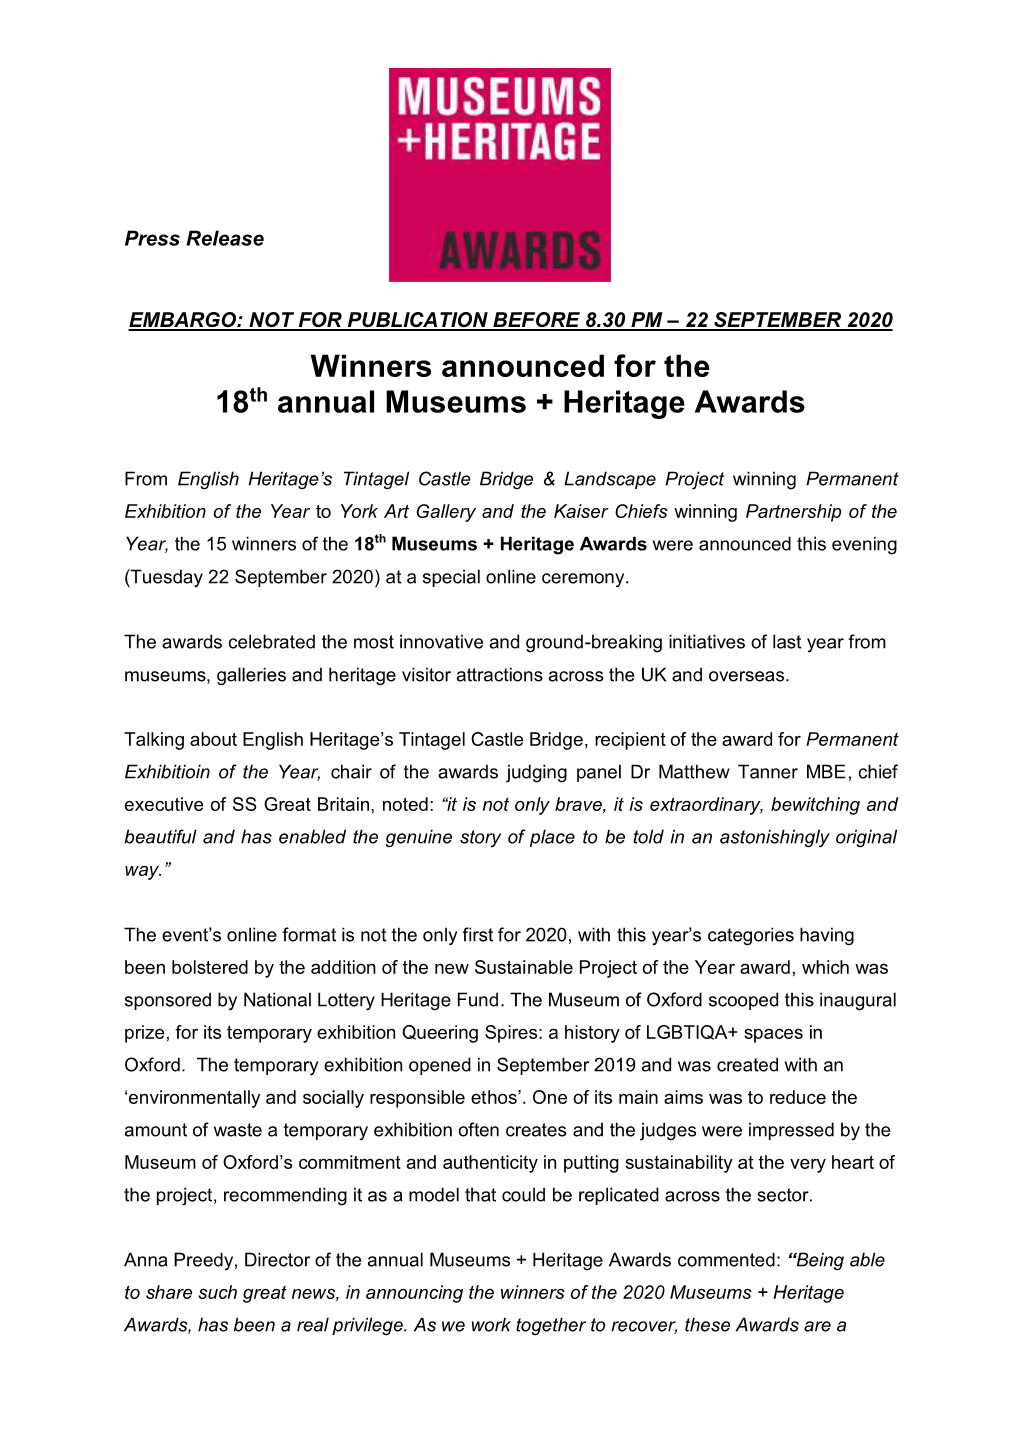 Winners Announced for the 18Th Annual Museums + Heritage Awards